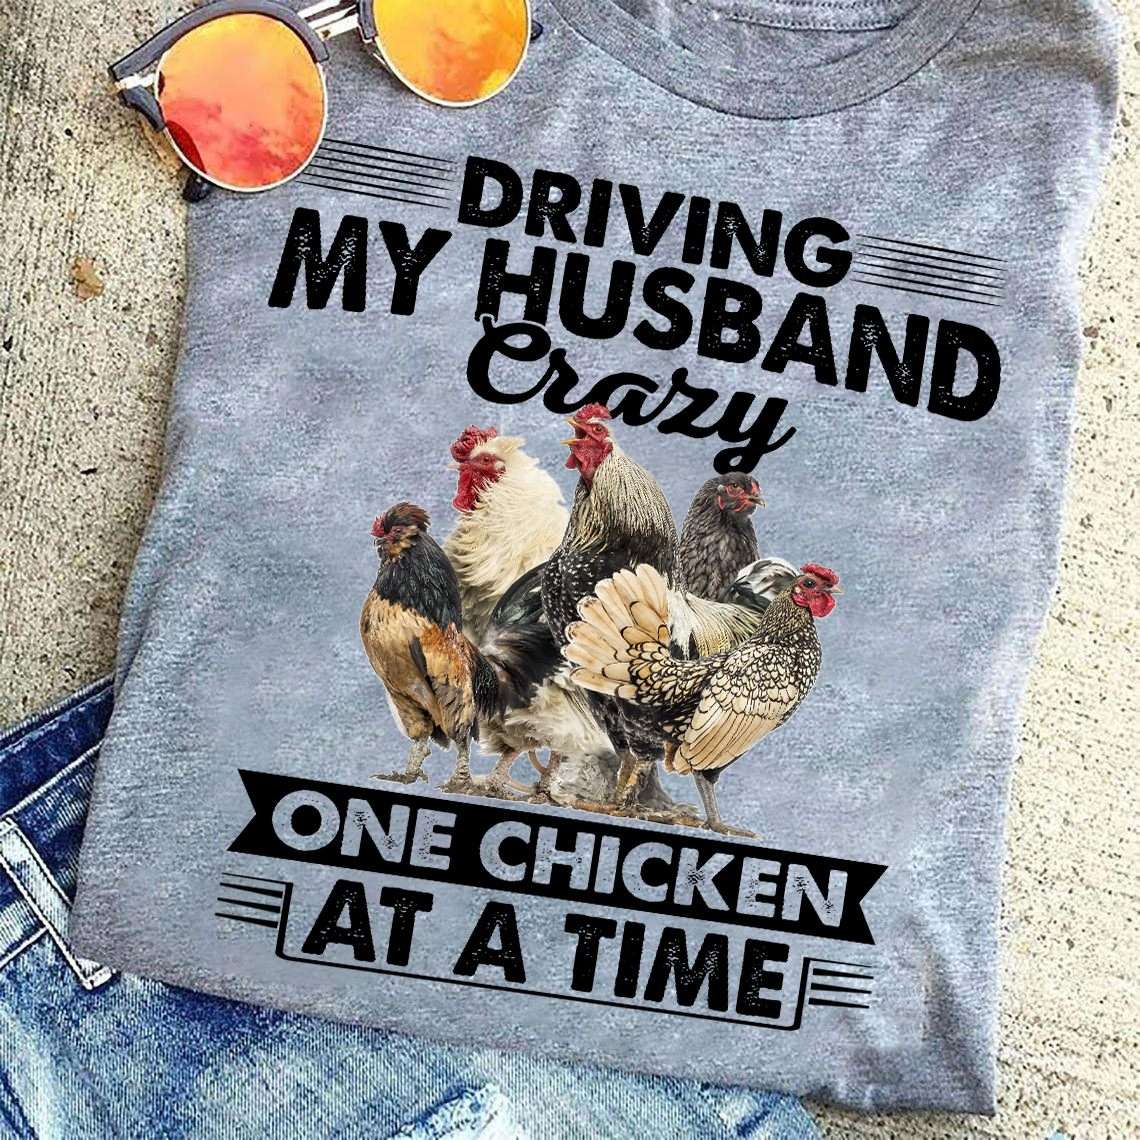 Driving my husband crazy, one chicken at a time - Chicken lover, huband loves chickens